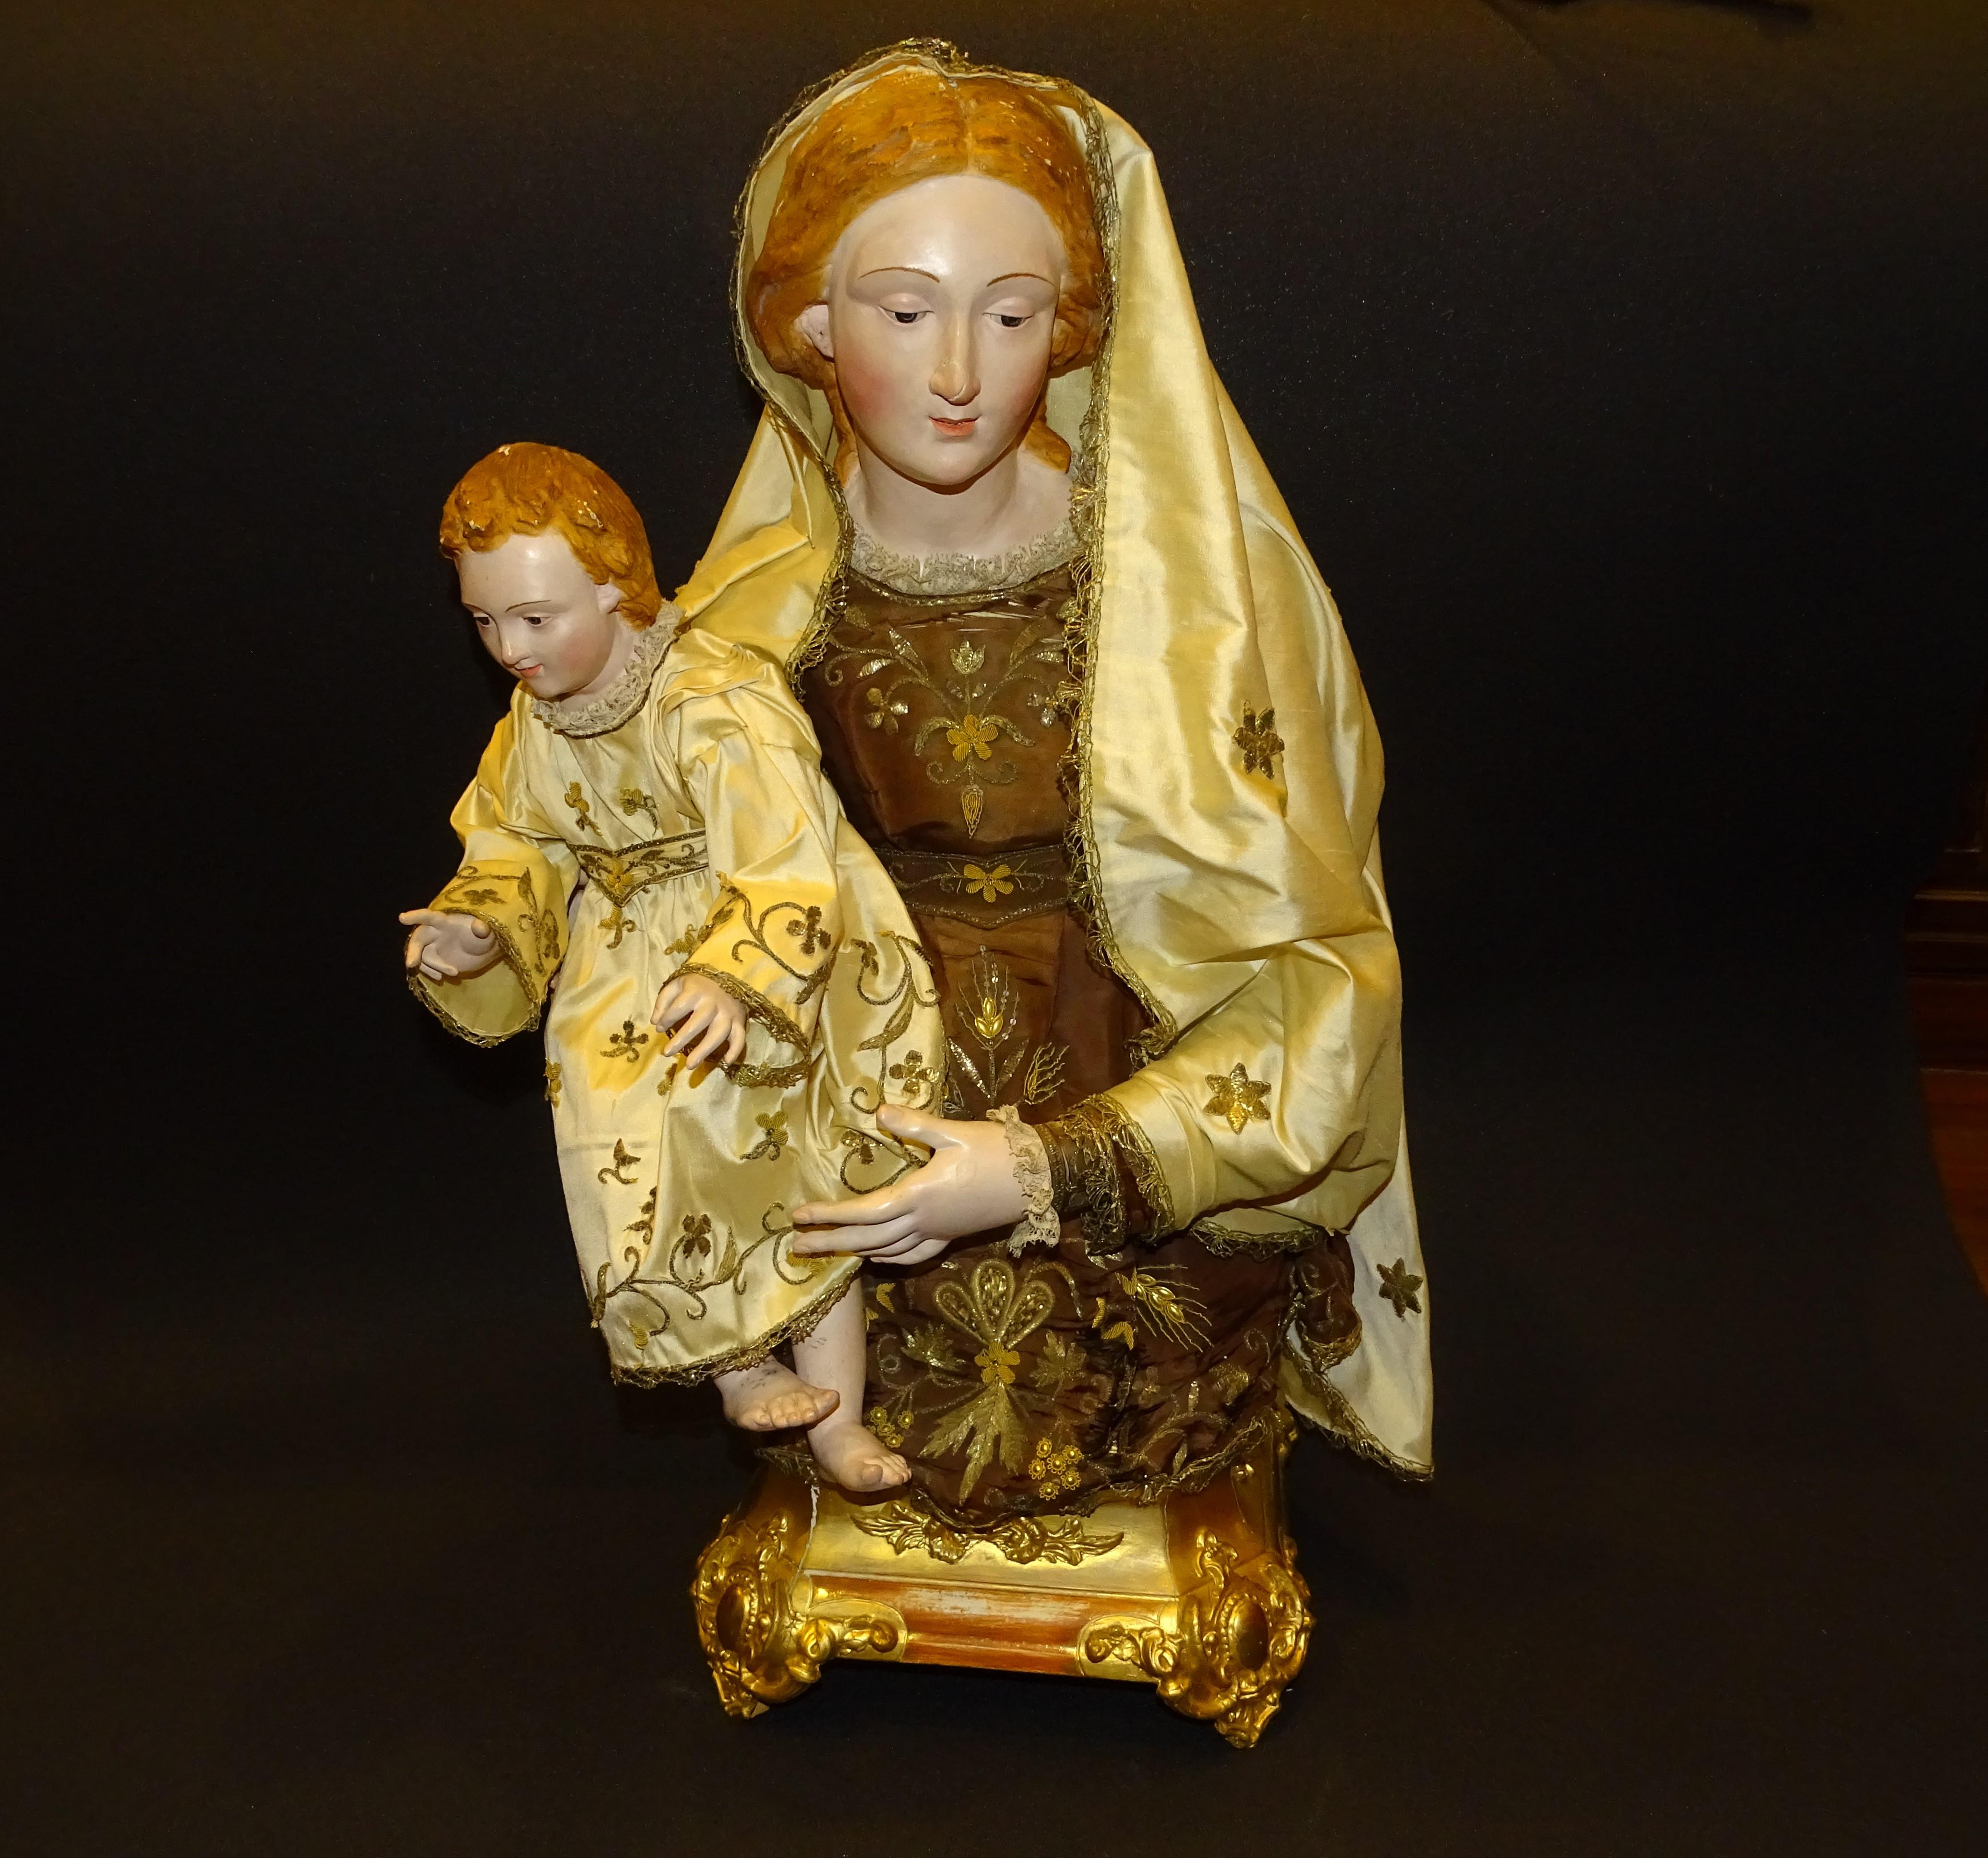 Neapolitan Scupture of a Virgin with the Child Jesus, Nativity 12